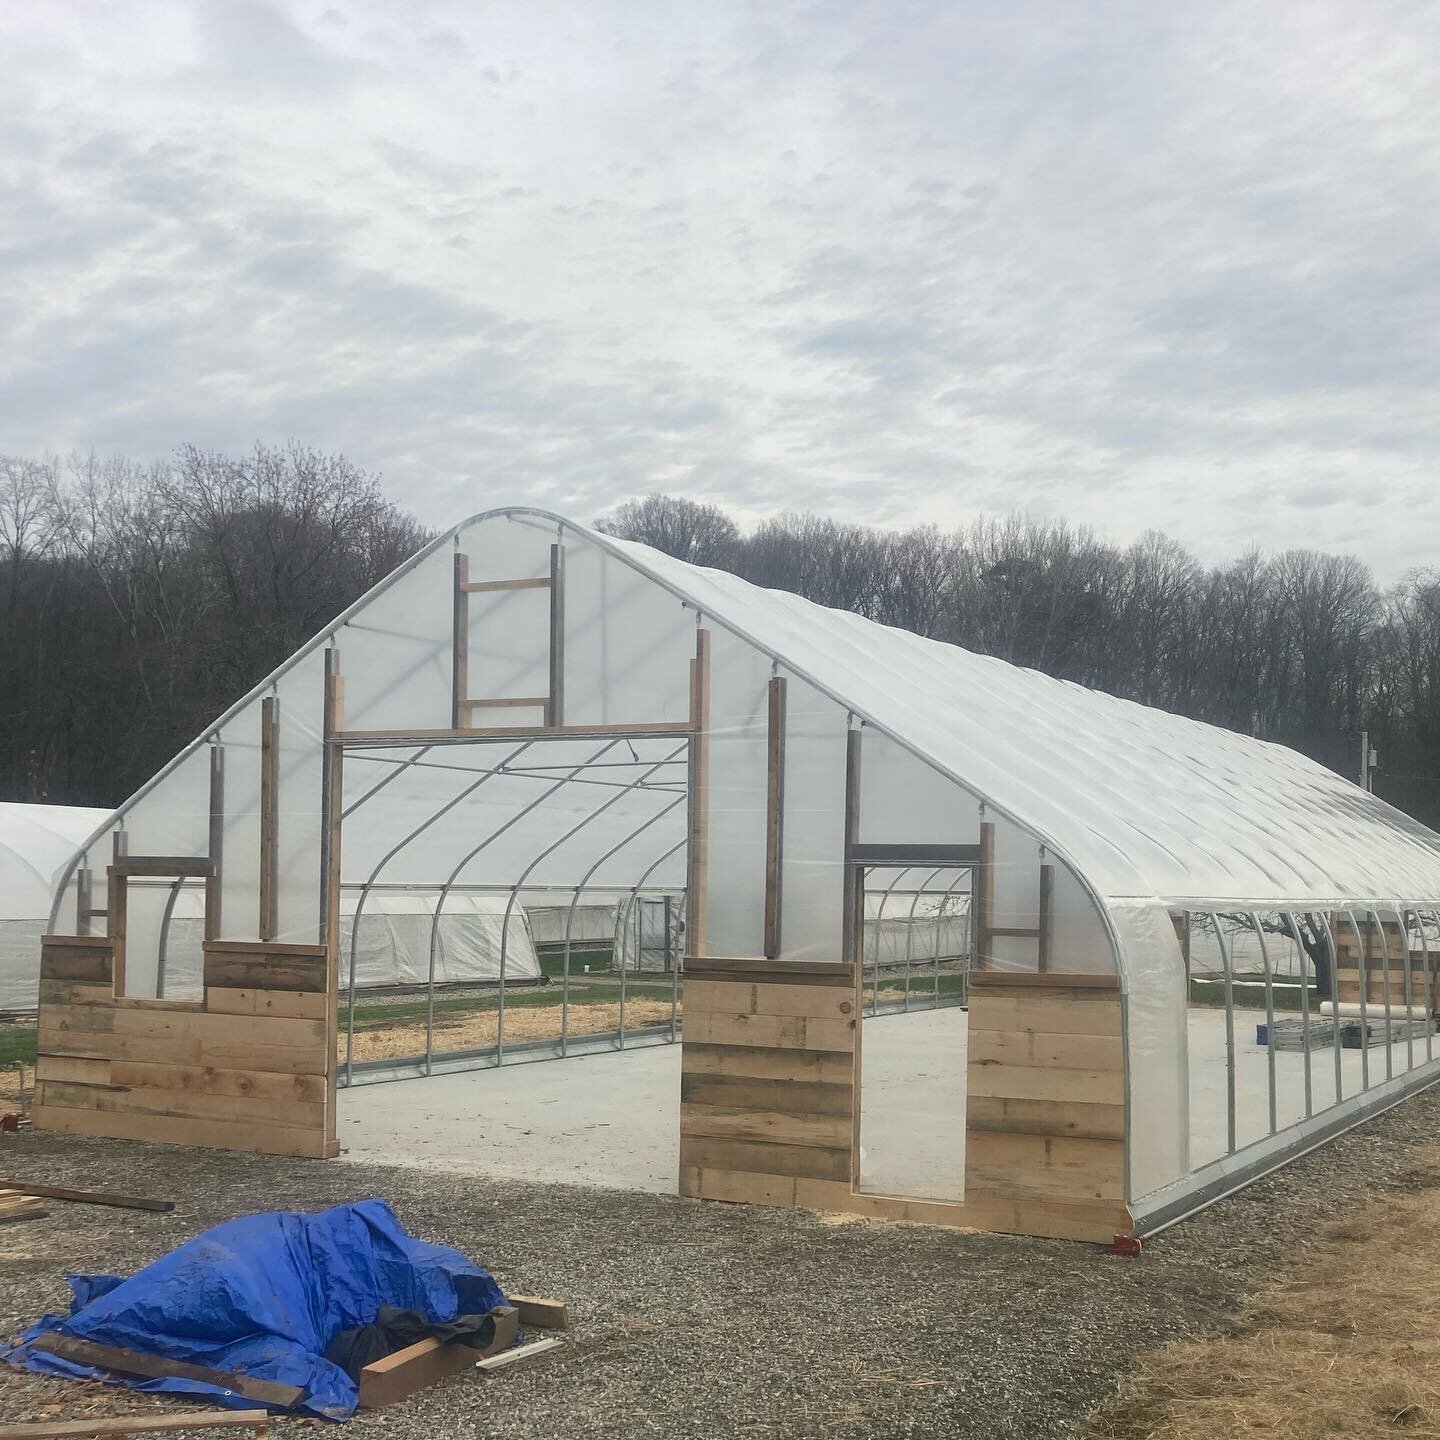 Either the frame grew 6&rsquo; overnight or the poly shrank in the dryer!! So close yet so far away @shelburnefarms #mismarkedpoly #theygrowupsofast #wintersoclose #greenhouseconstruction #greenhouse #hightunnel #vineripegh